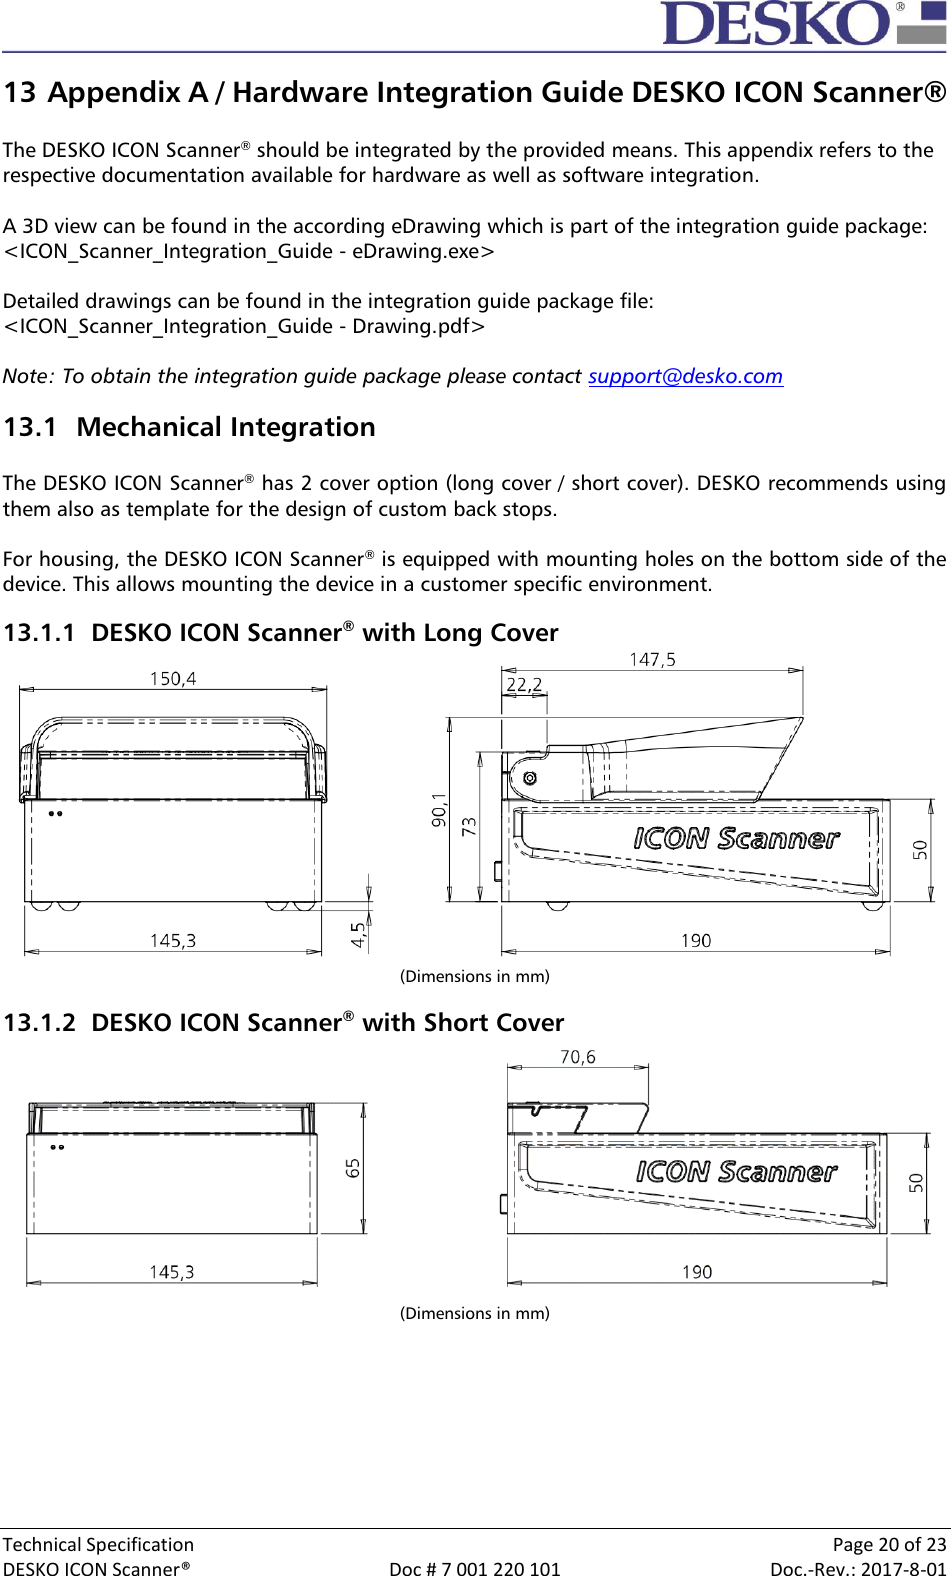  Technical Specification    Page 20 of 23 DESKO ICON Scanner®  Doc # 7 001 220 101  Doc.-Rev.: 2017-8-01  13 Appendix A / Hardware Integration Guide DESKO ICON Scanner®  The DESKO ICON Scanner® should be integrated by the provided means. This appendix refers to the respective documentation available for hardware as well as software integration.  A 3D view can be found in the according eDrawing which is part of the integration guide package: &lt;ICON_Scanner_Integration_Guide - eDrawing.exe&gt;  Detailed drawings can be found in the integration guide package file: &lt;ICON_Scanner_Integration_Guide - Drawing.pdf&gt;  Note: To obtain the integration guide package please contact support@desko.com 13.1 Mechanical Integration  The DESKO ICON Scanner® has 2 cover option (long cover / short cover). DESKO recommends using them also as template for the design of custom back stops.   For housing, the DESKO ICON Scanner® is equipped with mounting holes on the bottom side of the device. This allows mounting the device in a customer specific environment. 13.1.1 DESKO ICON Scanner® with Long Cover  (Dimensions in mm) 13.1.2 DESKO ICON Scanner® with Short Cover  (Dimensions in mm)    